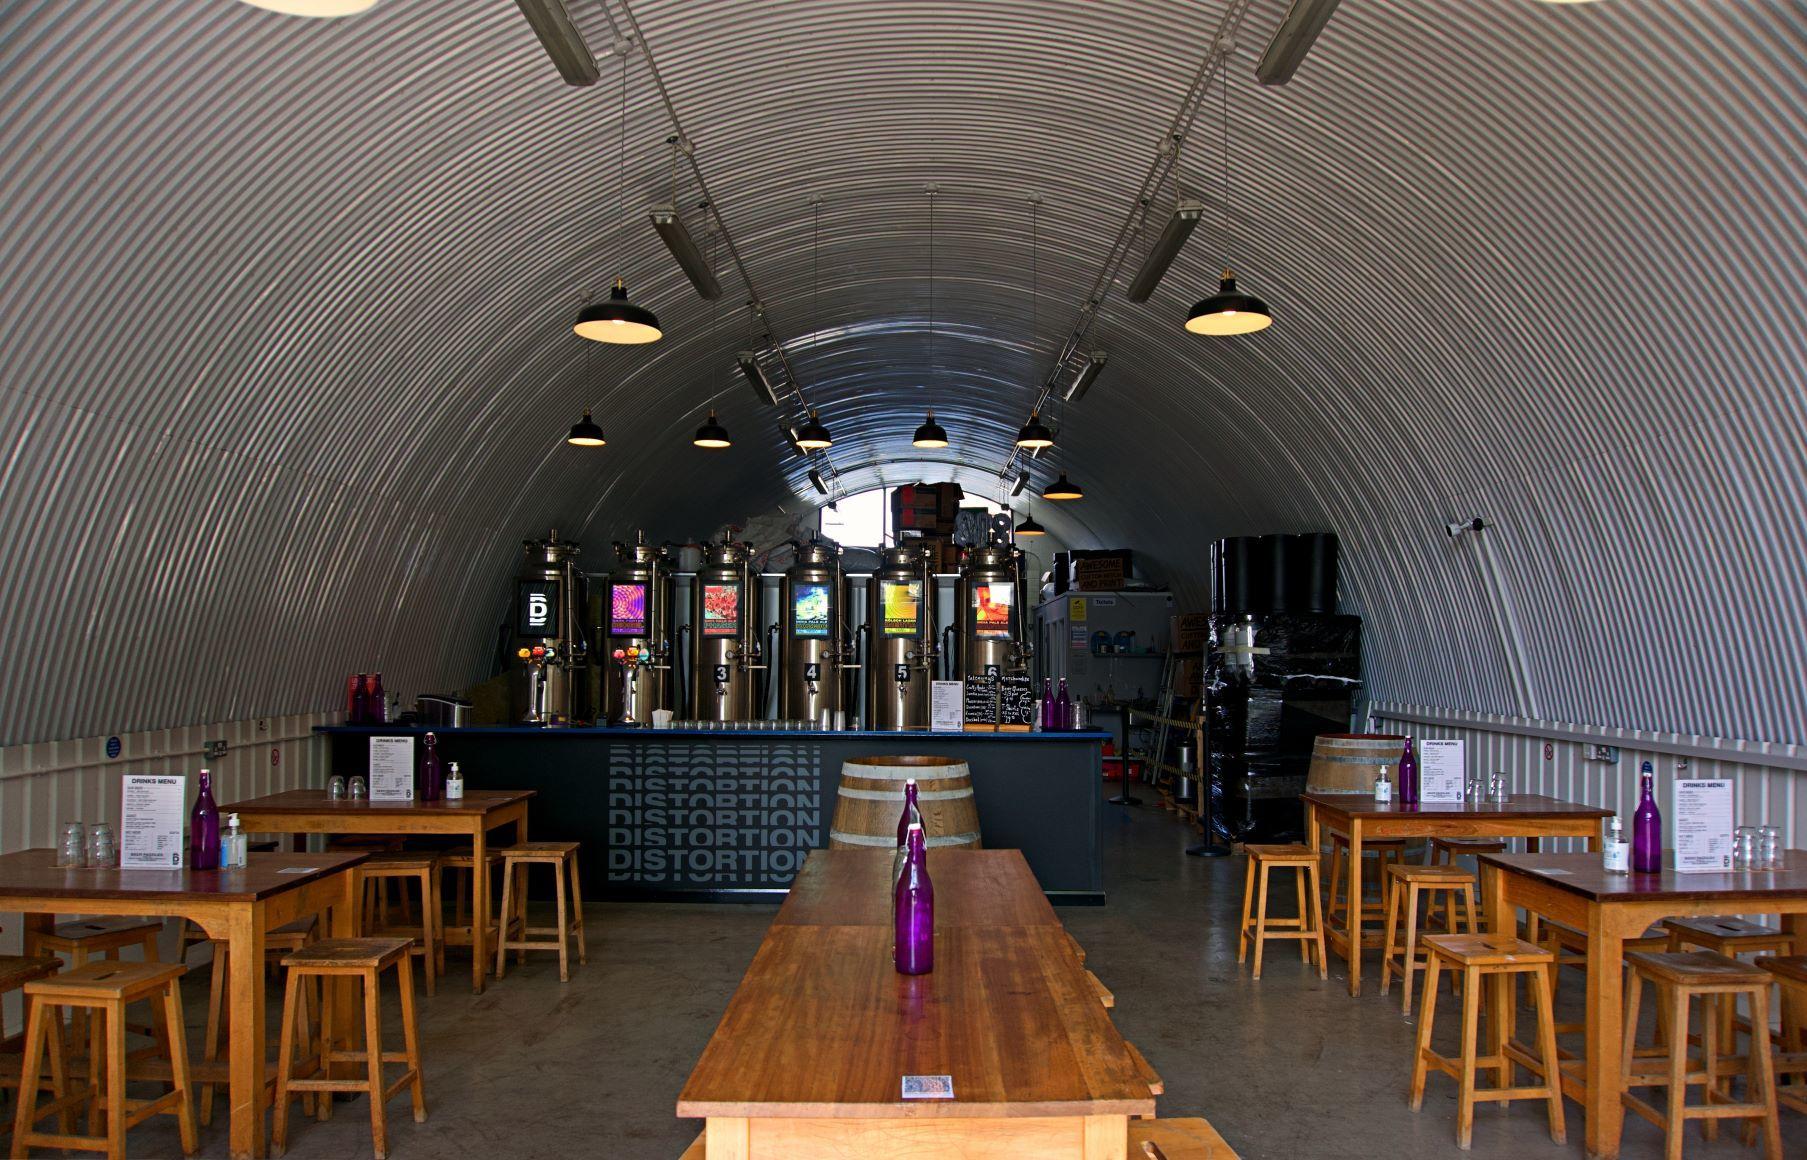 Distortion Brewing Company photo #3